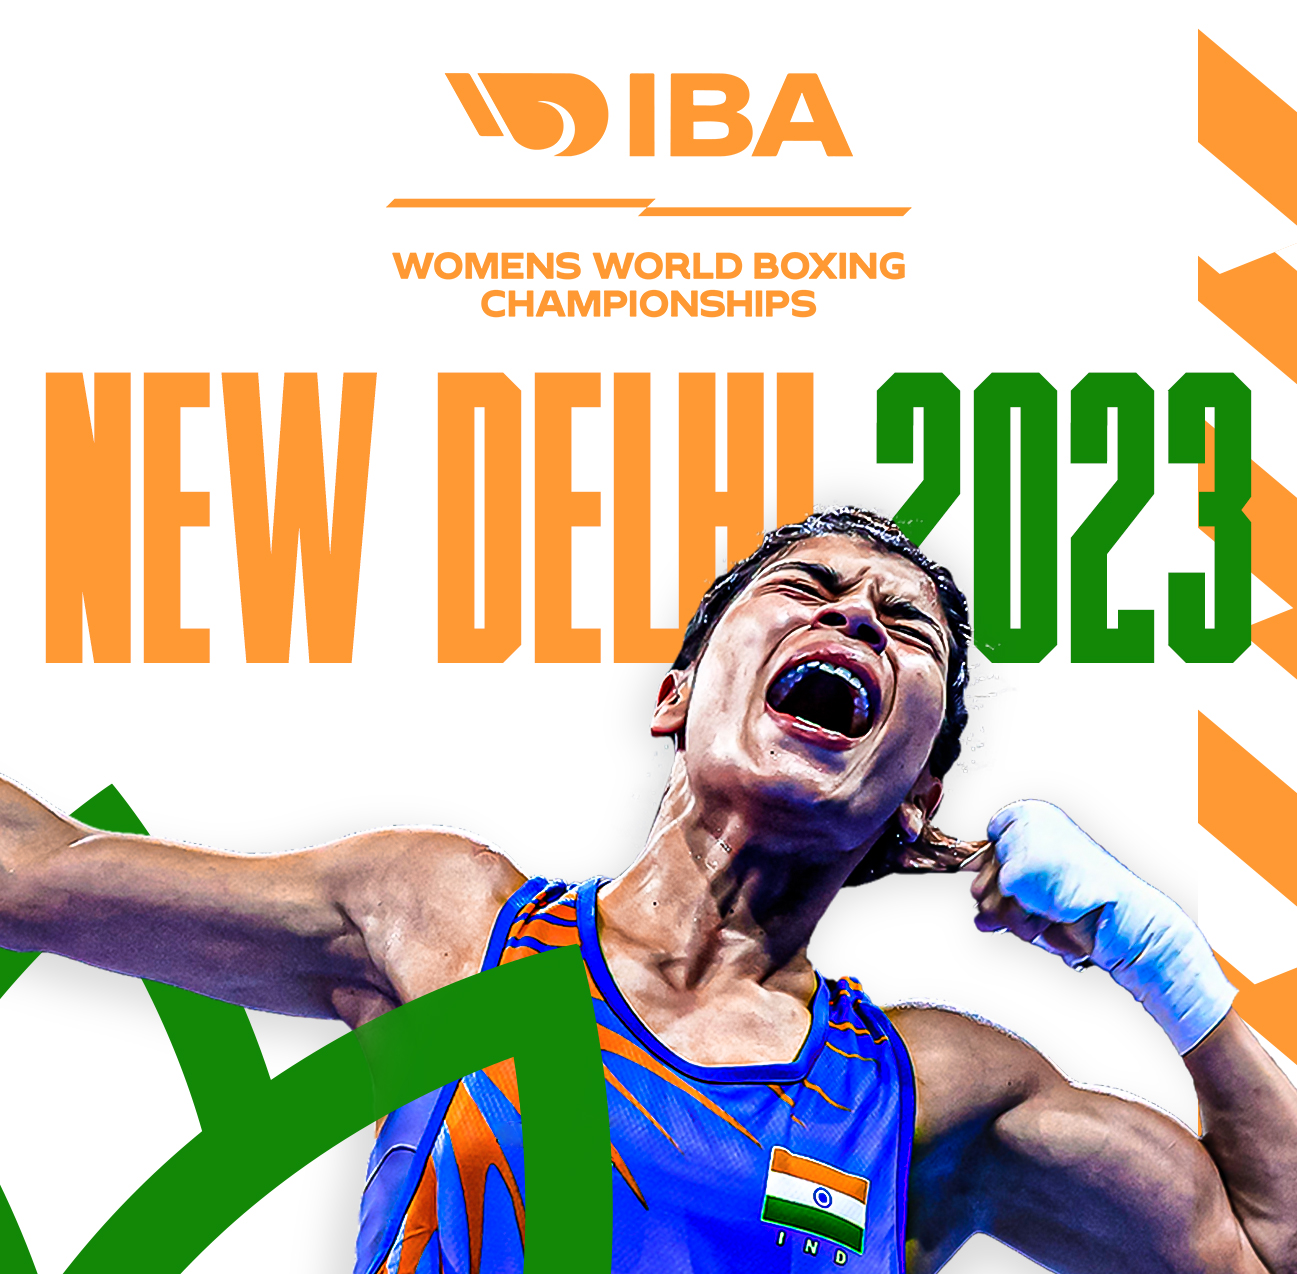 IBA unveils brand identity for Women’s World Boxing Championships in